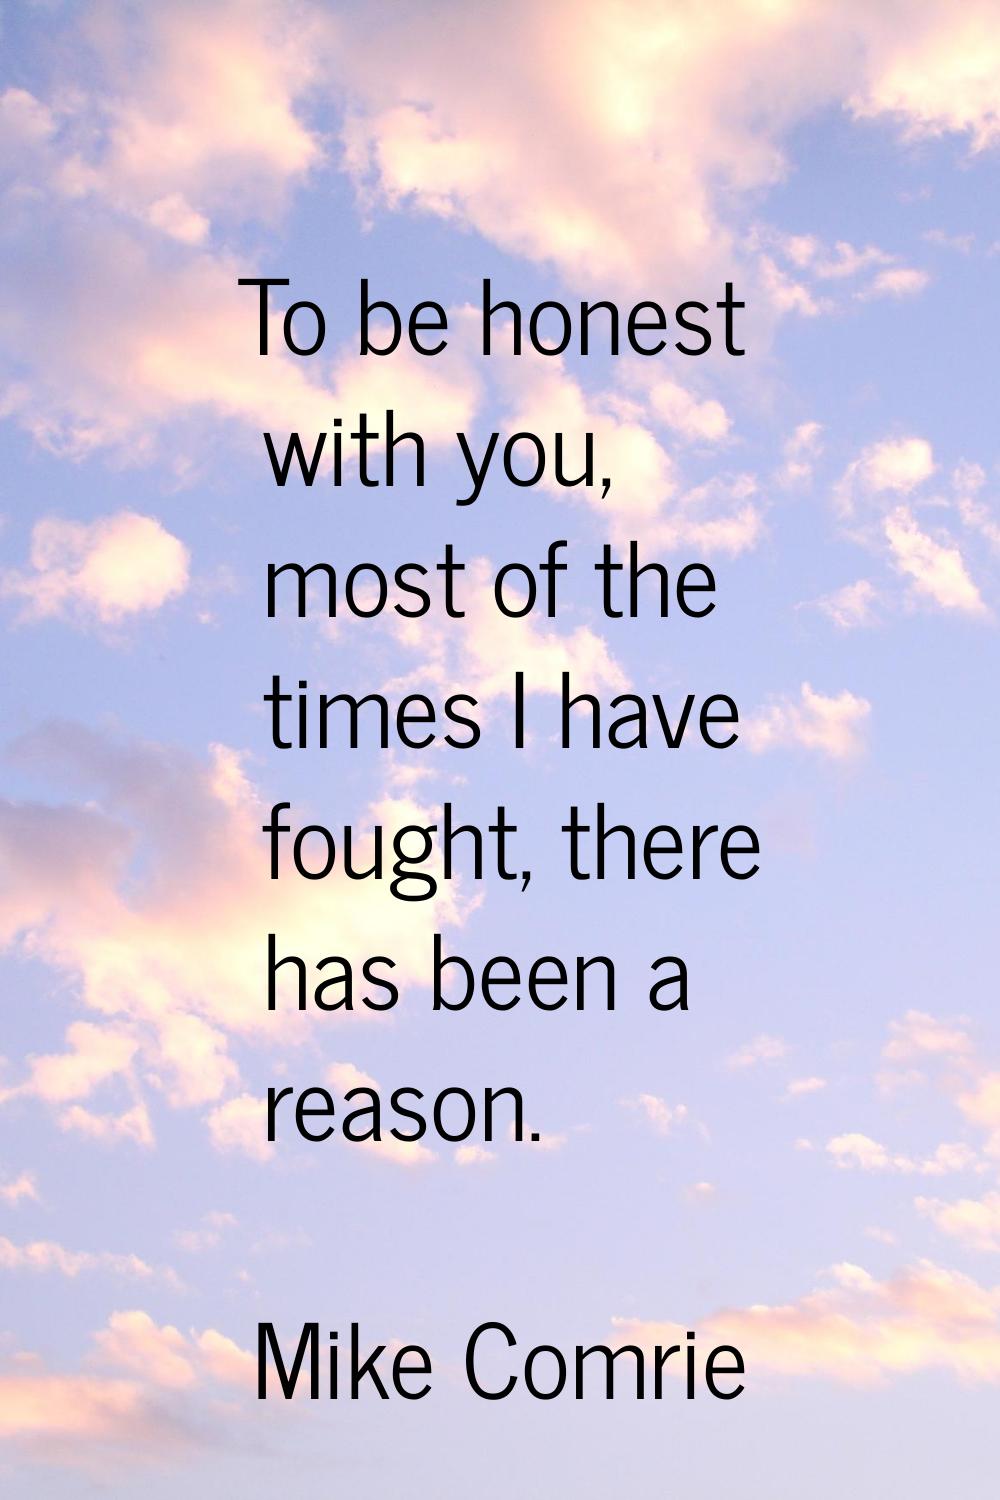 To be honest with you, most of the times I have fought, there has been a reason.